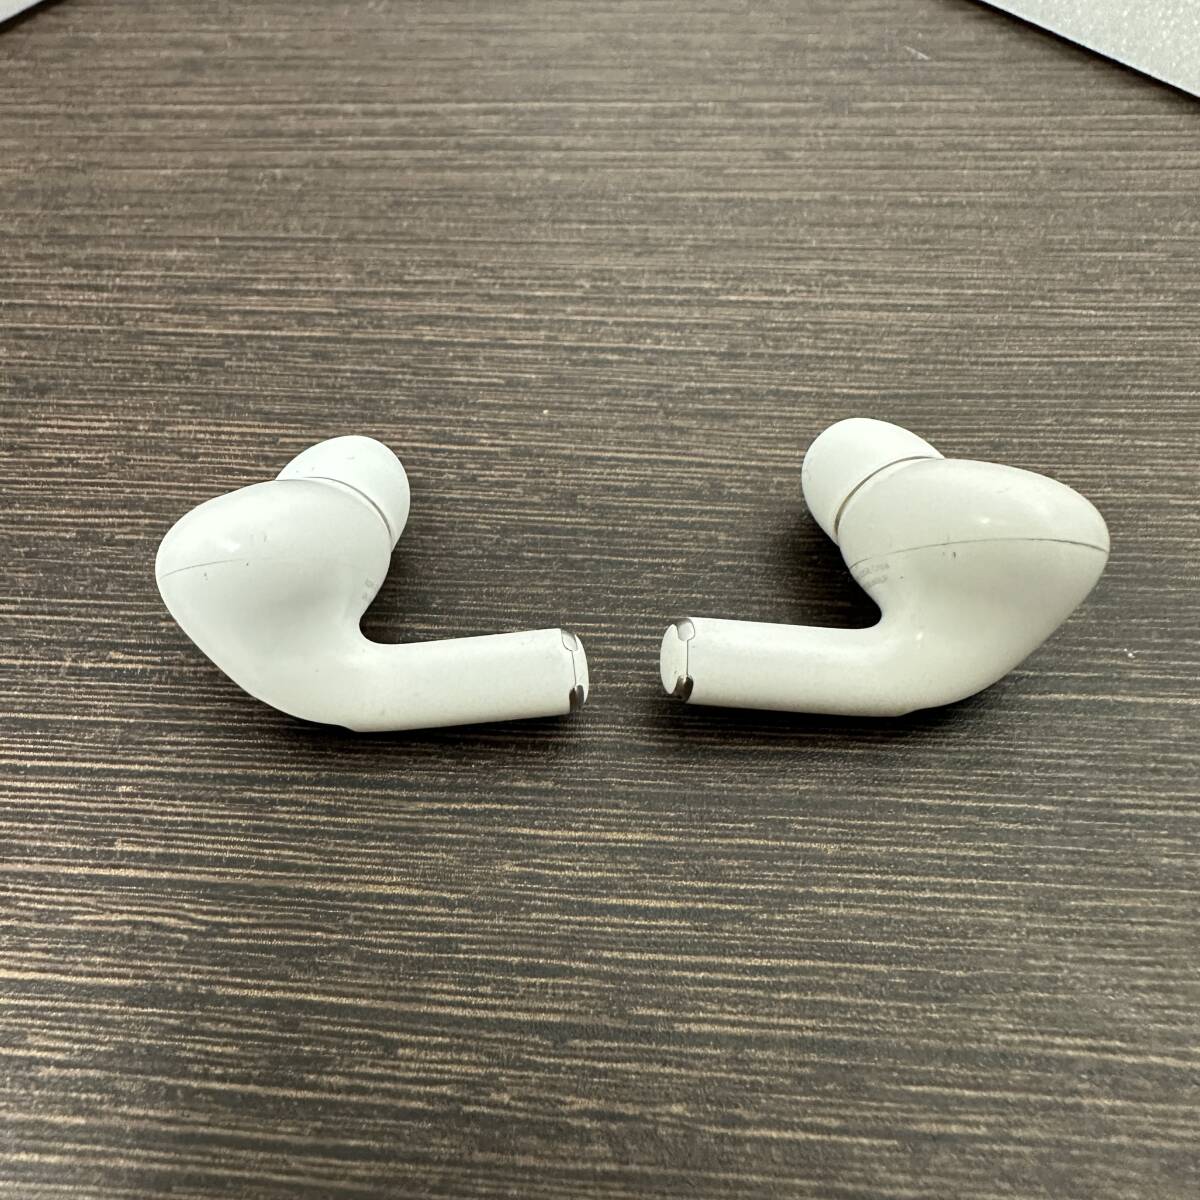 ☆★H1587【送料込み】Apple AirPods Pro MQD83J/A A2700 A2698 A2699 第2世代 AirPods Pro MagSafe 充電ケース ケーブル・箱付きの画像3